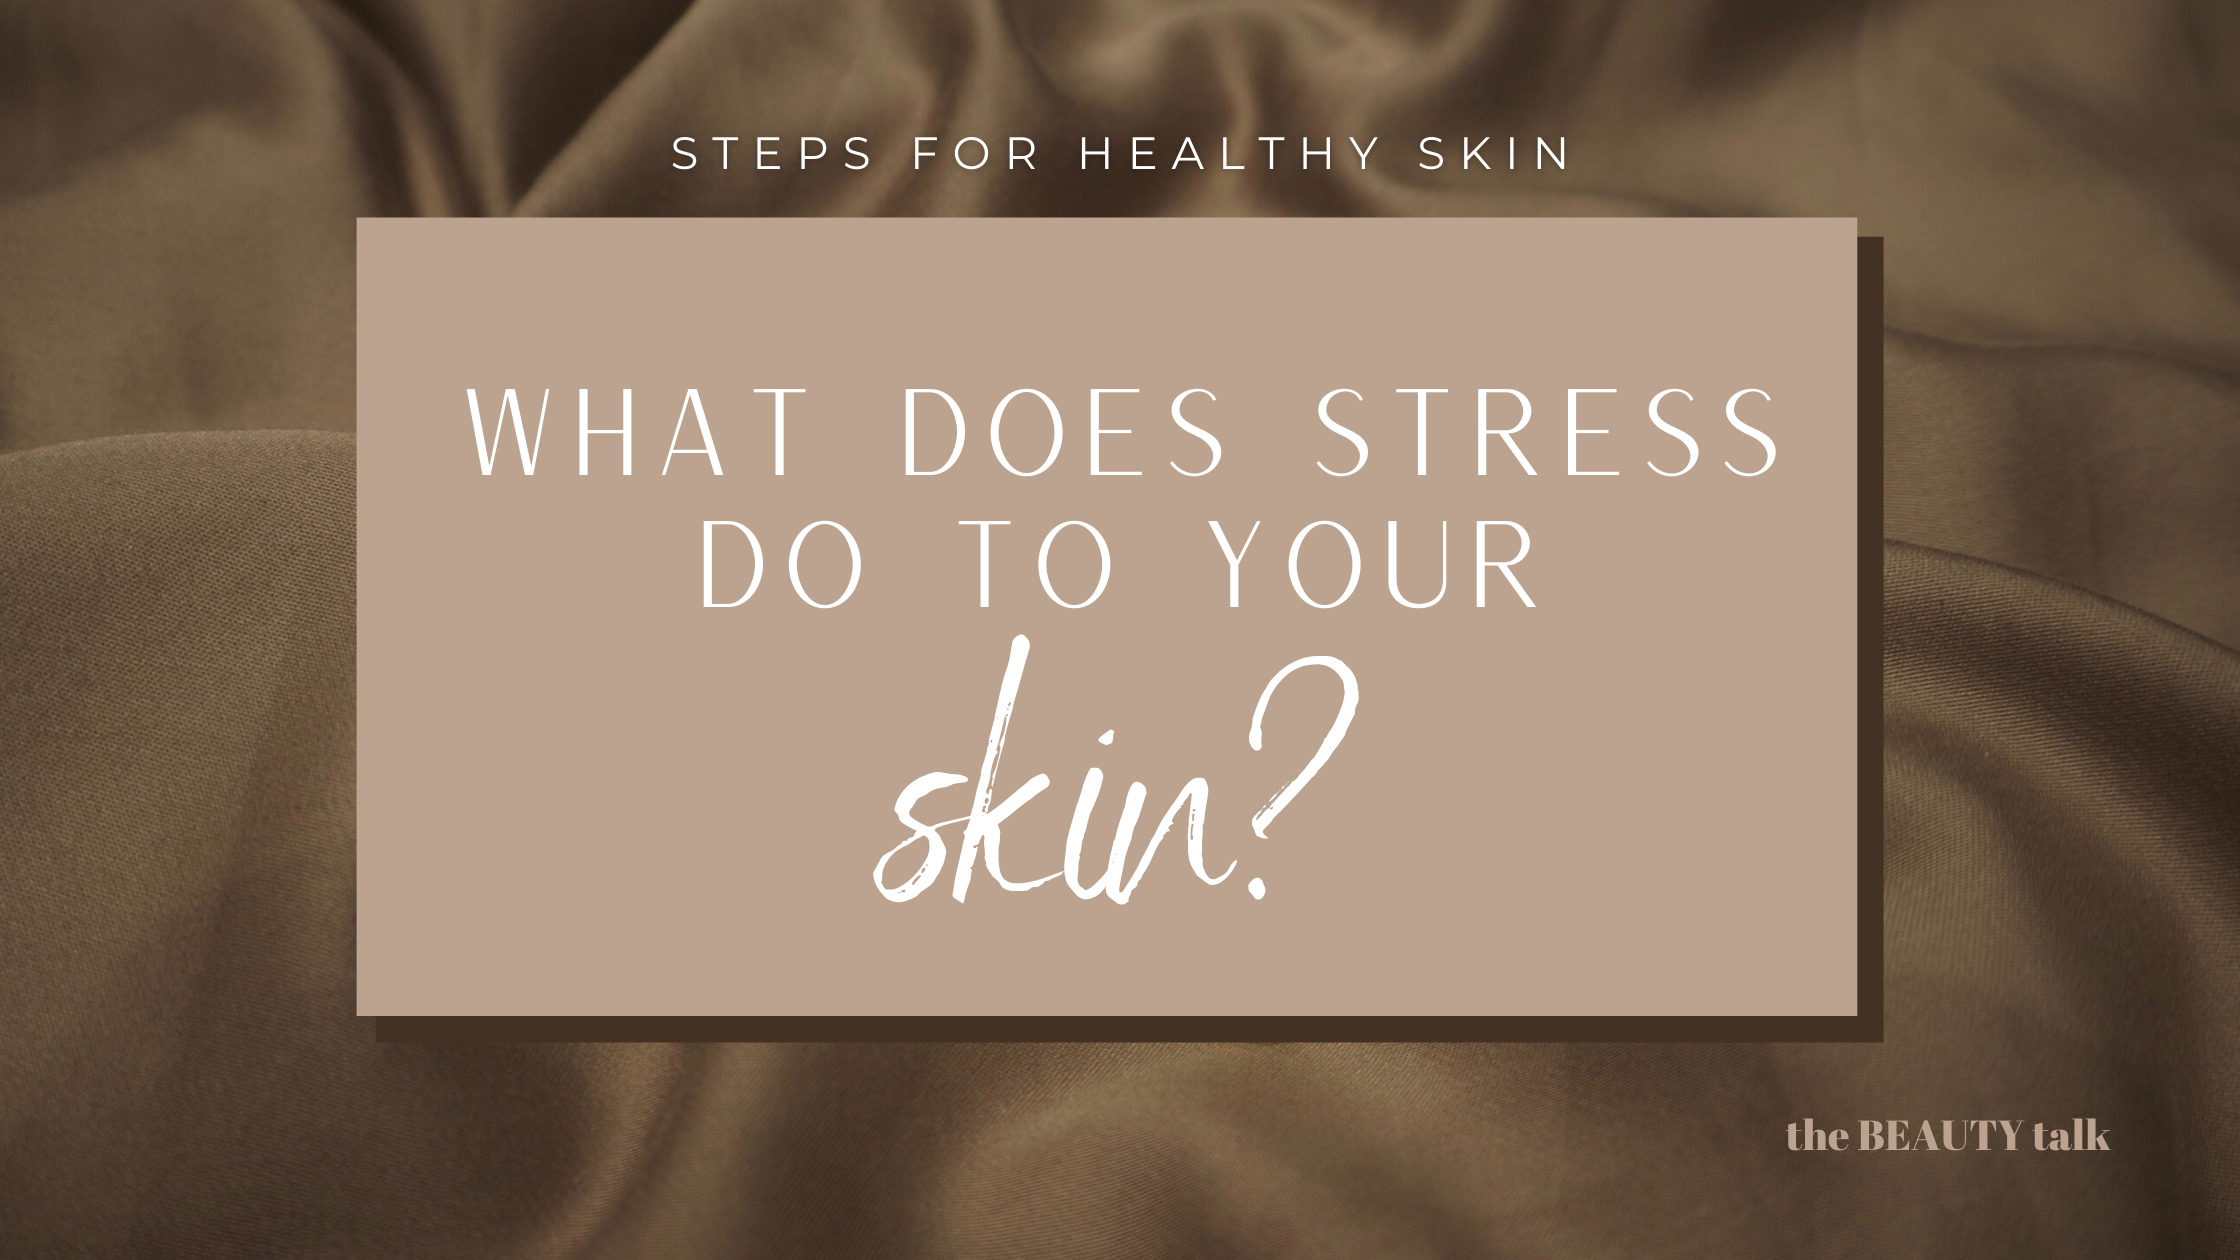 What does stress do to your skin?